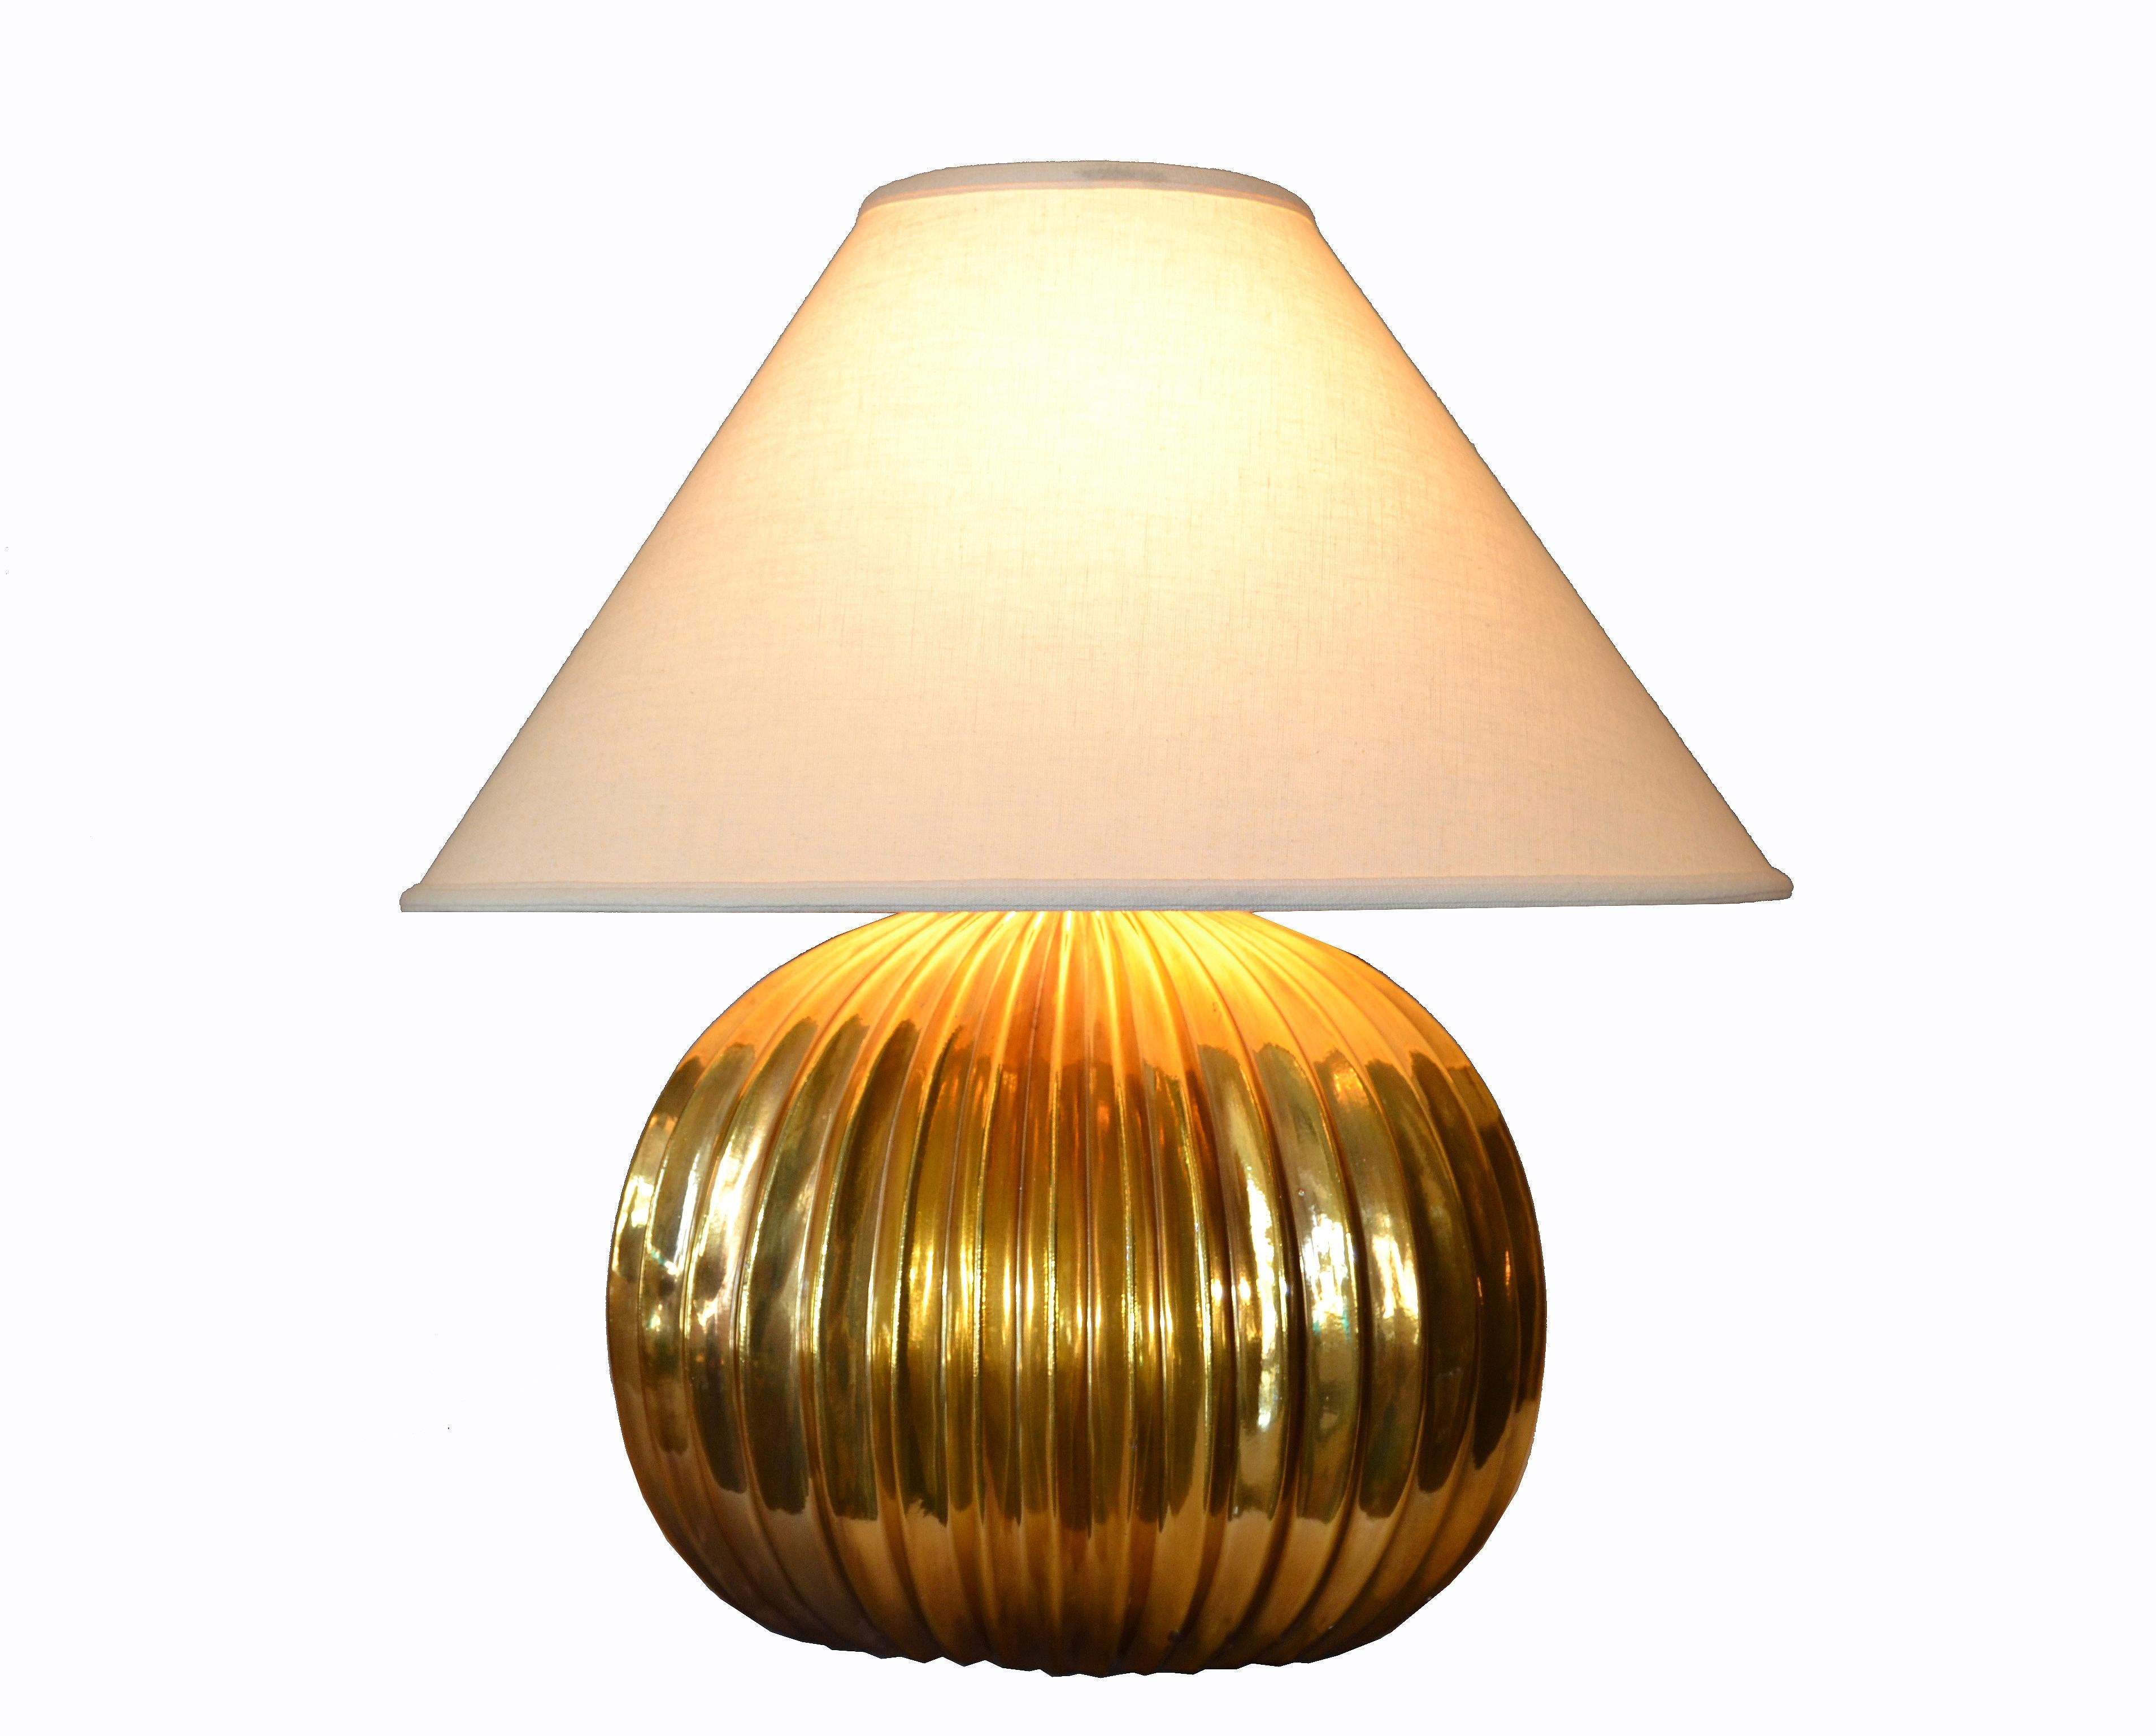 Gorgeous Italian Mid-Century Modern golden ribbed table lamp with an oval linen lamp shade.
Wired for the U.S. and uses a max. 75 watts light bulb.
Dimensions Shade:
Width 23.25 inches
Depth 13.75 inches
Height 12.25 inches.